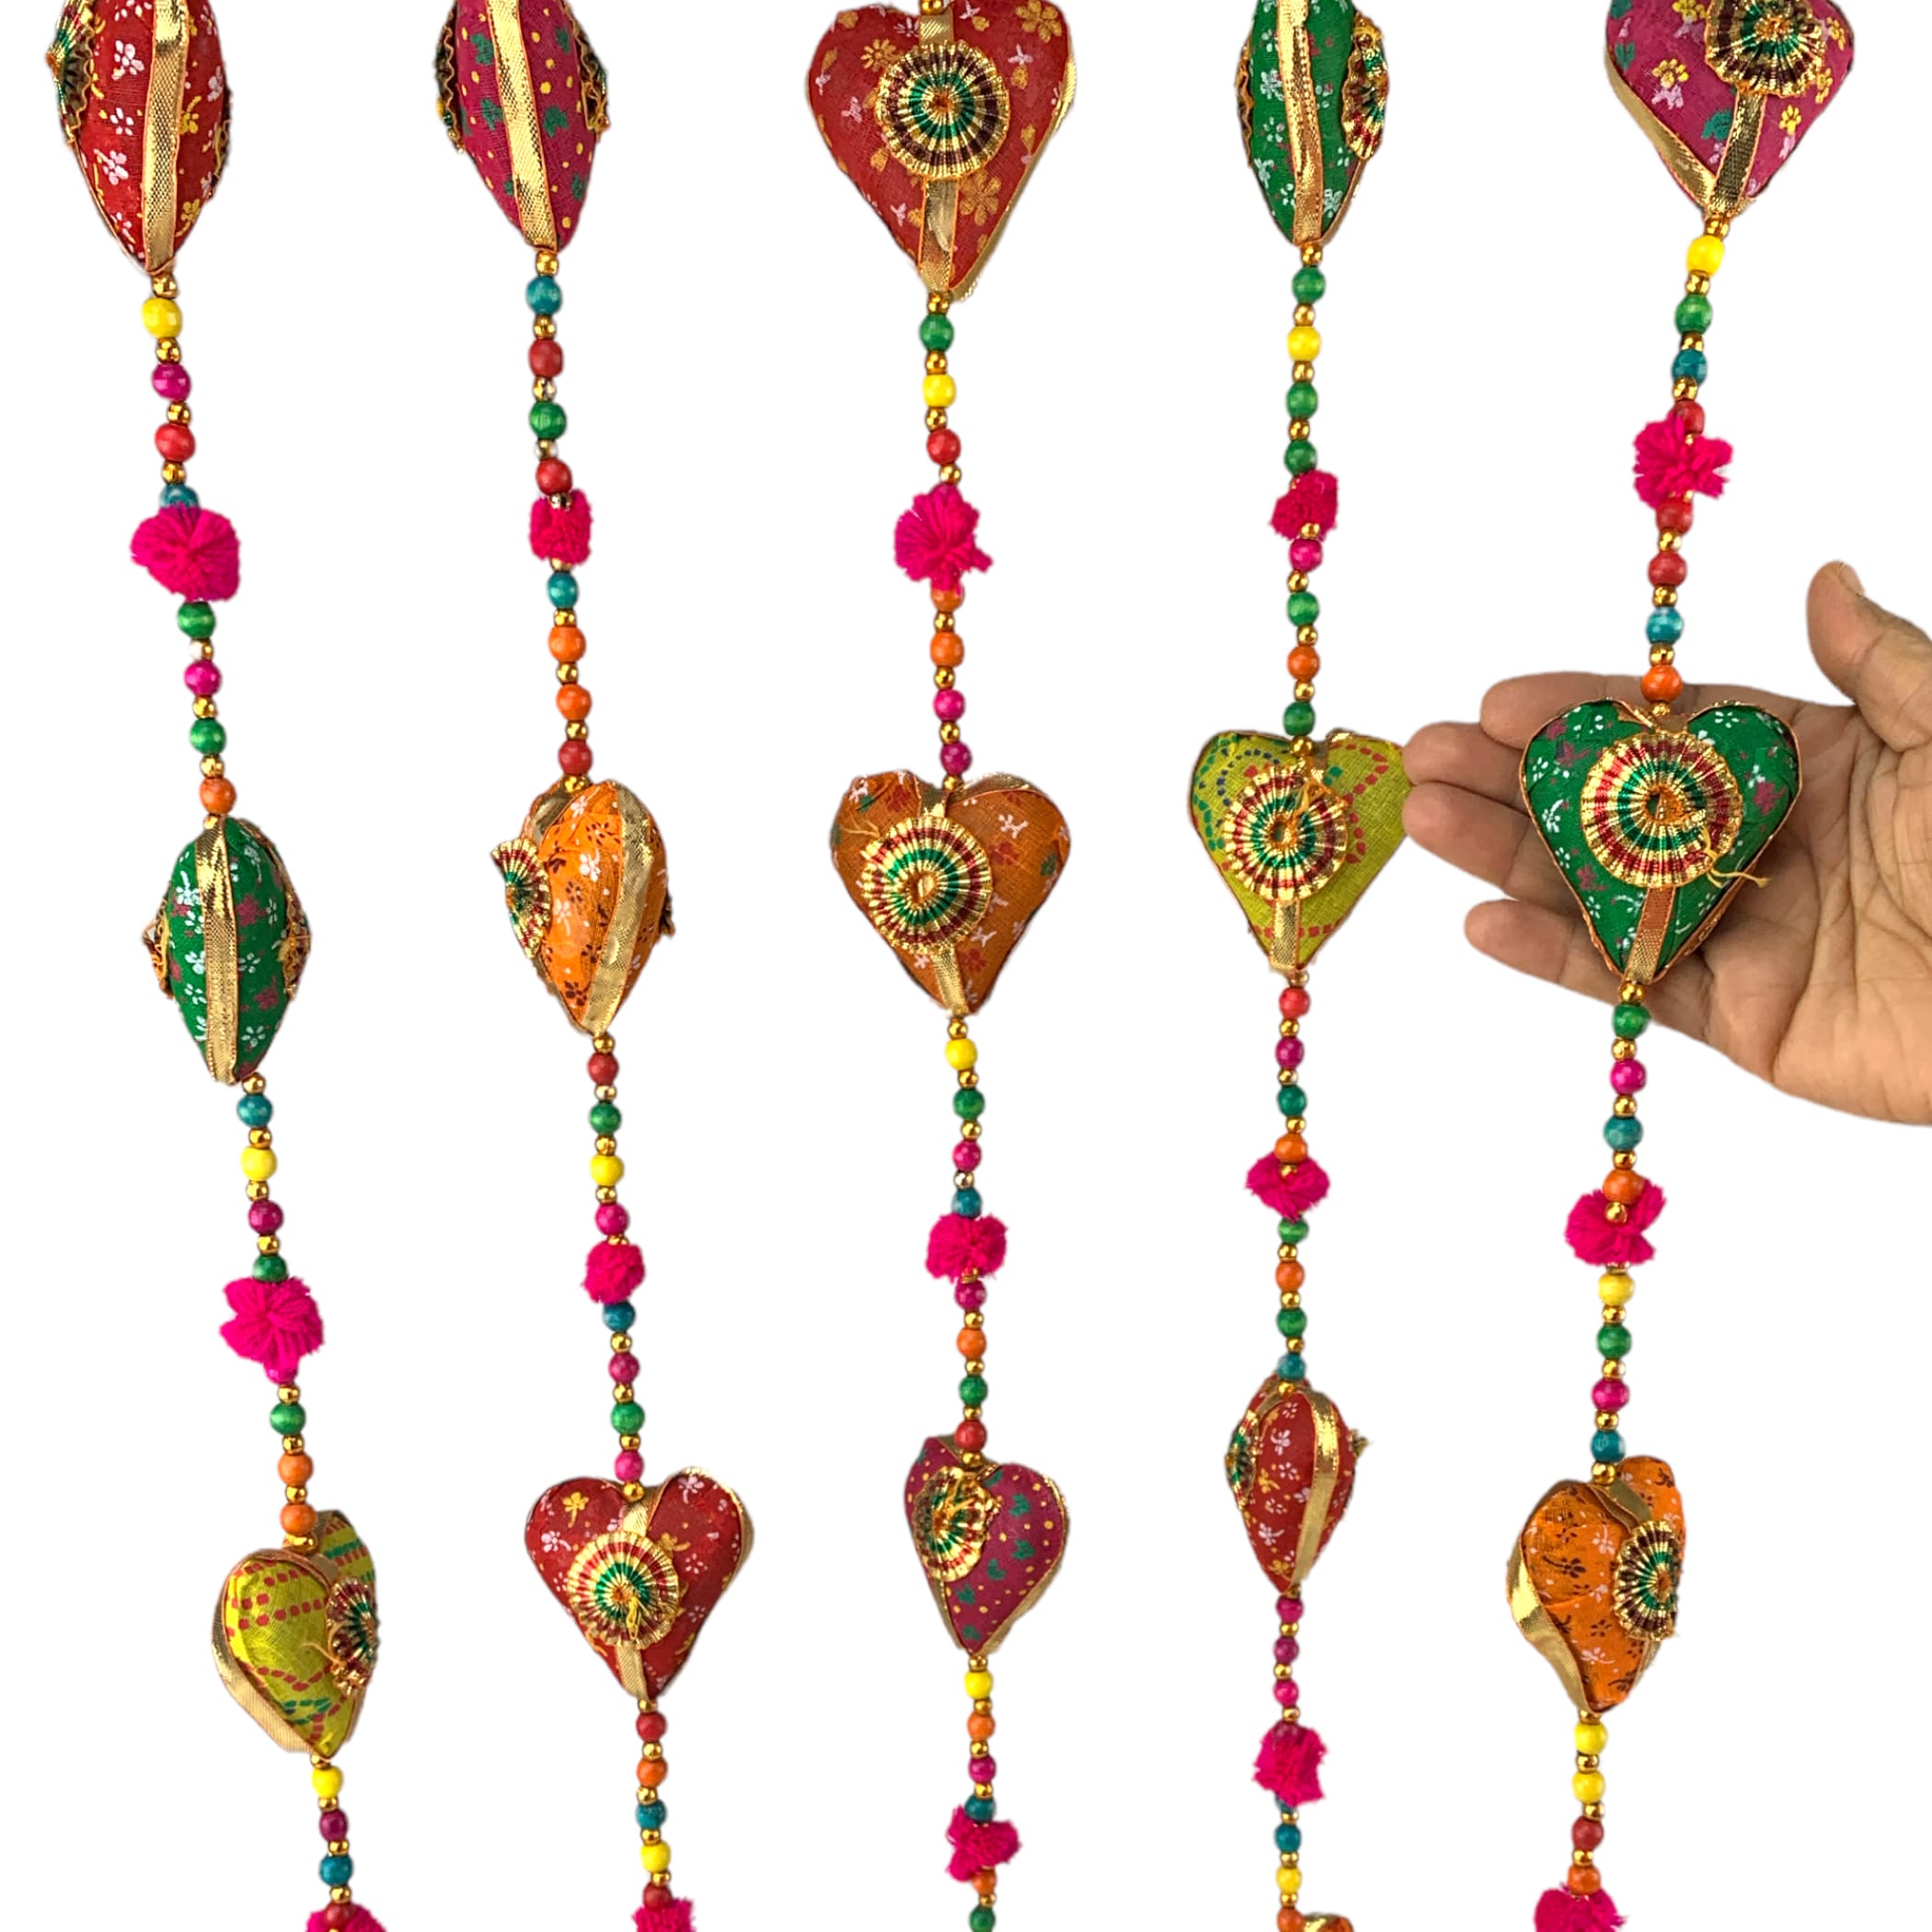 Rajasthani door hanging wind chime 6 strings wall indian